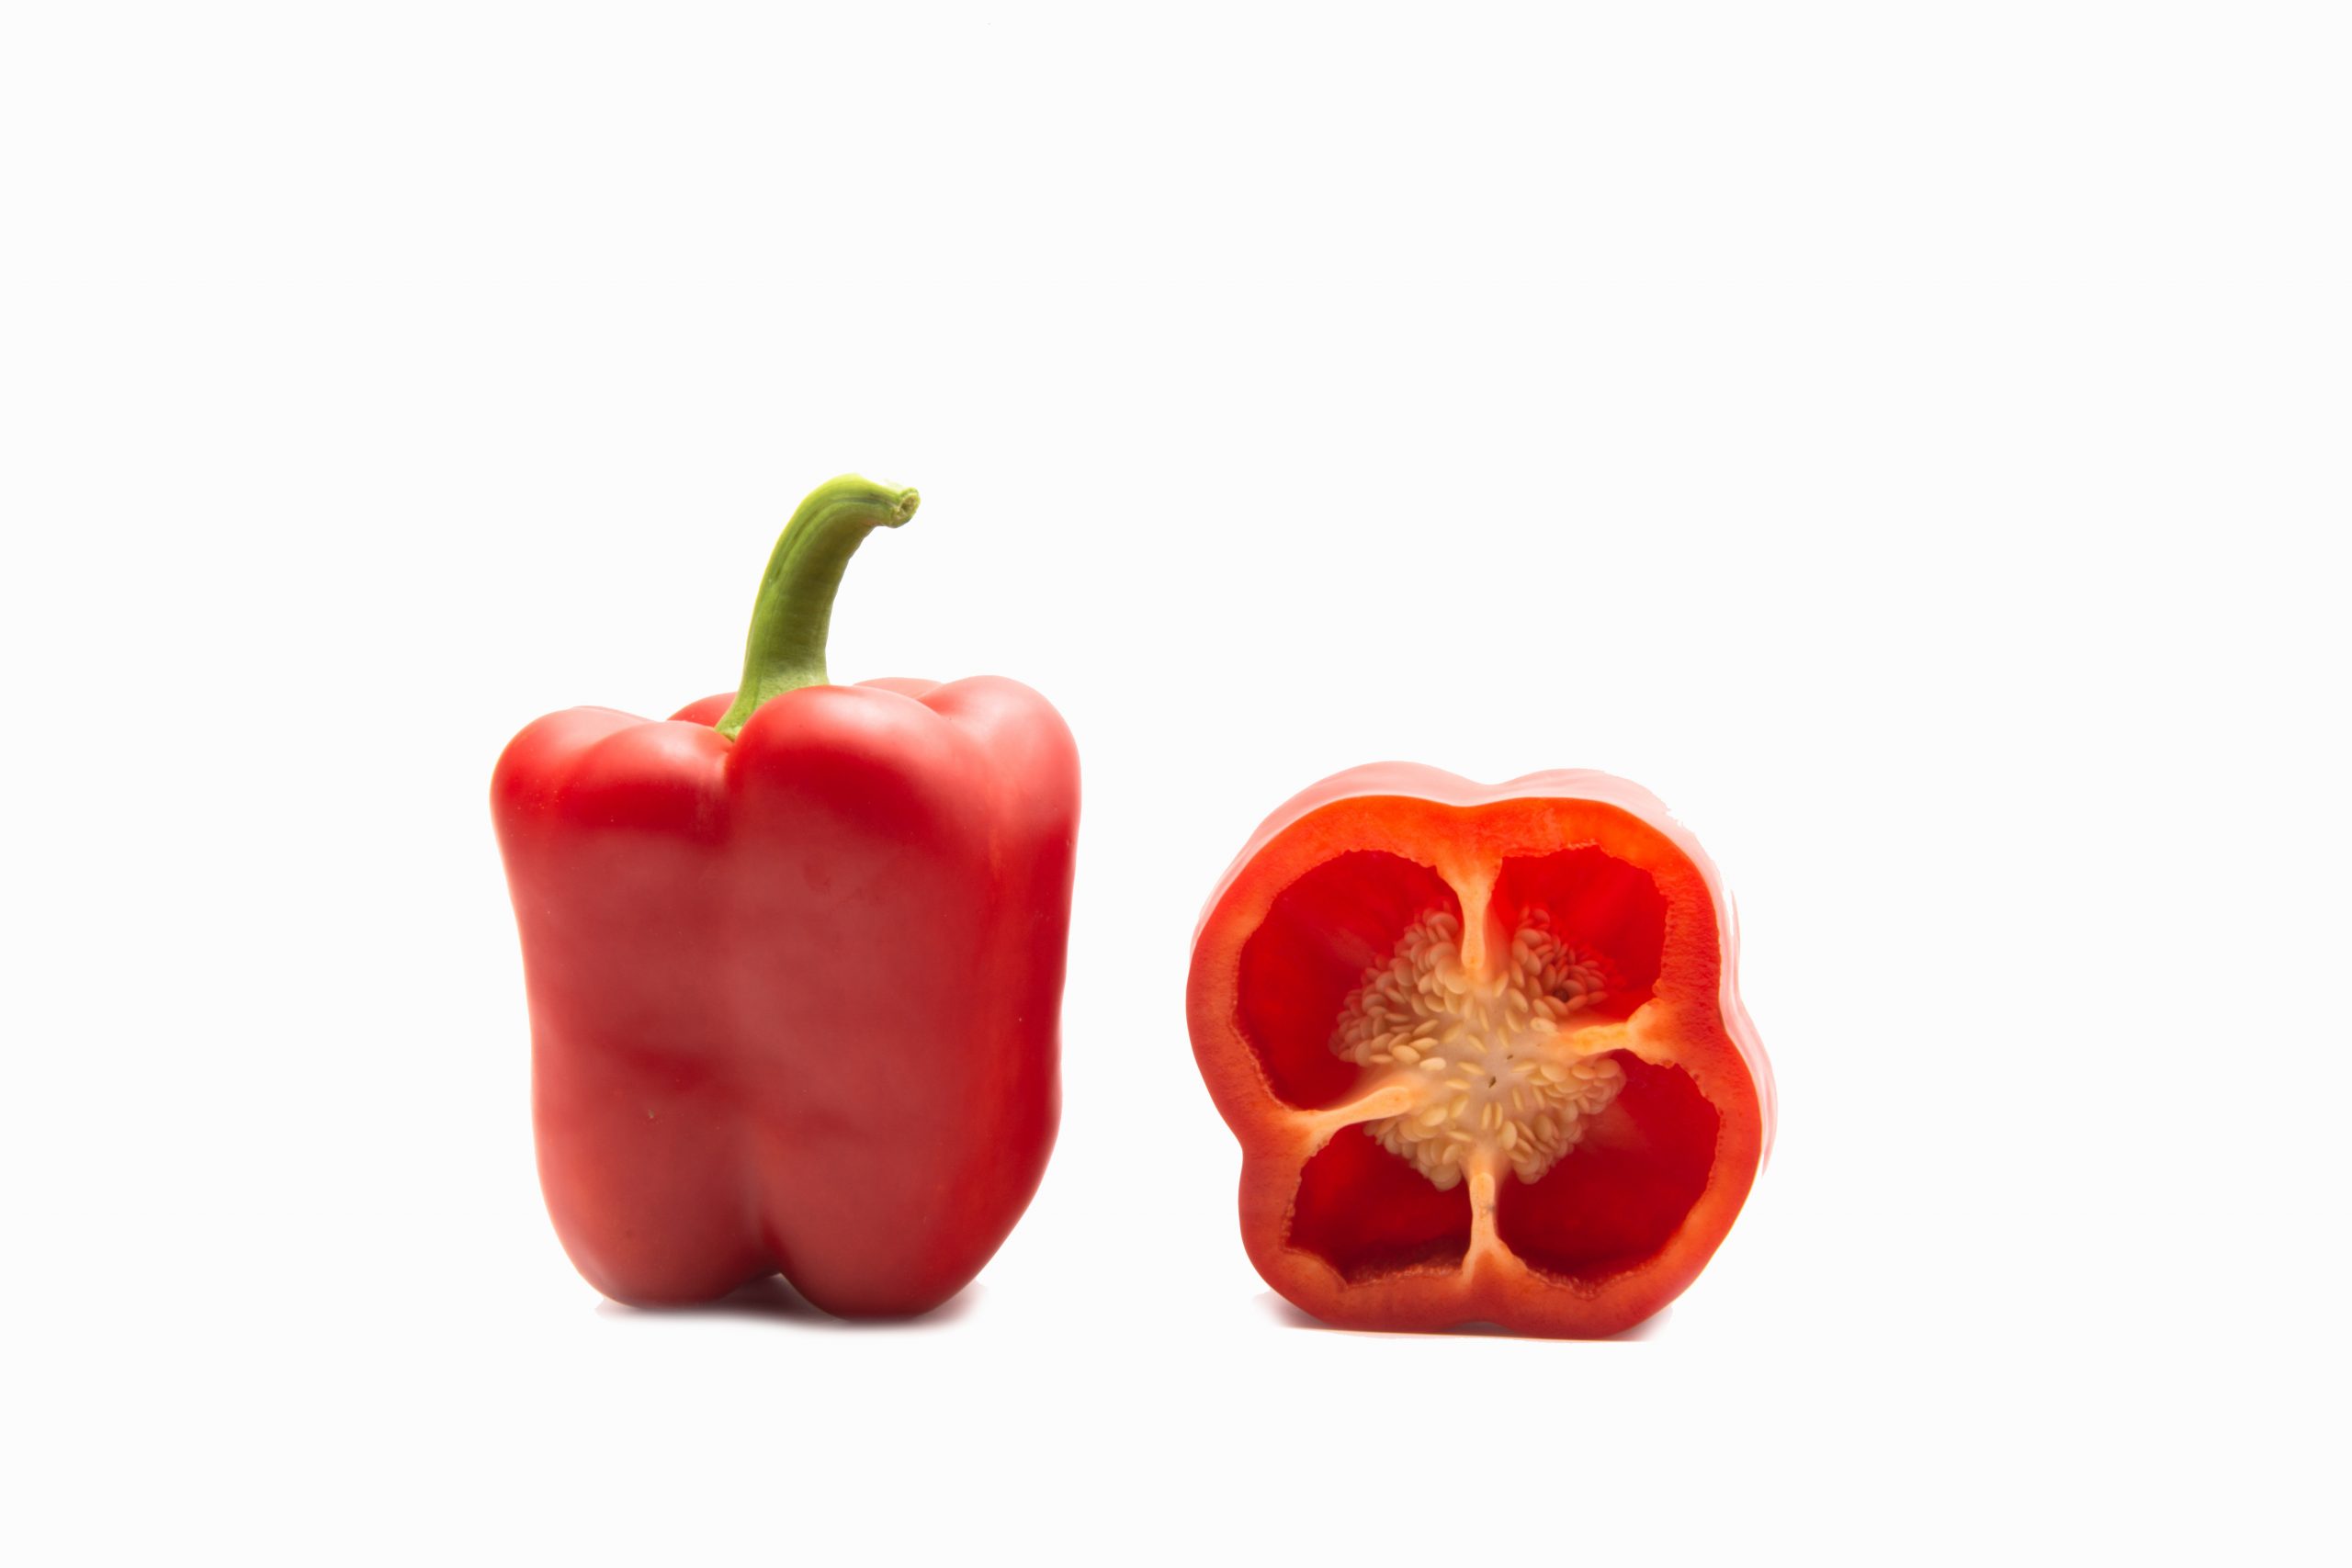 Gialiano, the Top Seeds International pepper beats the spanish cold